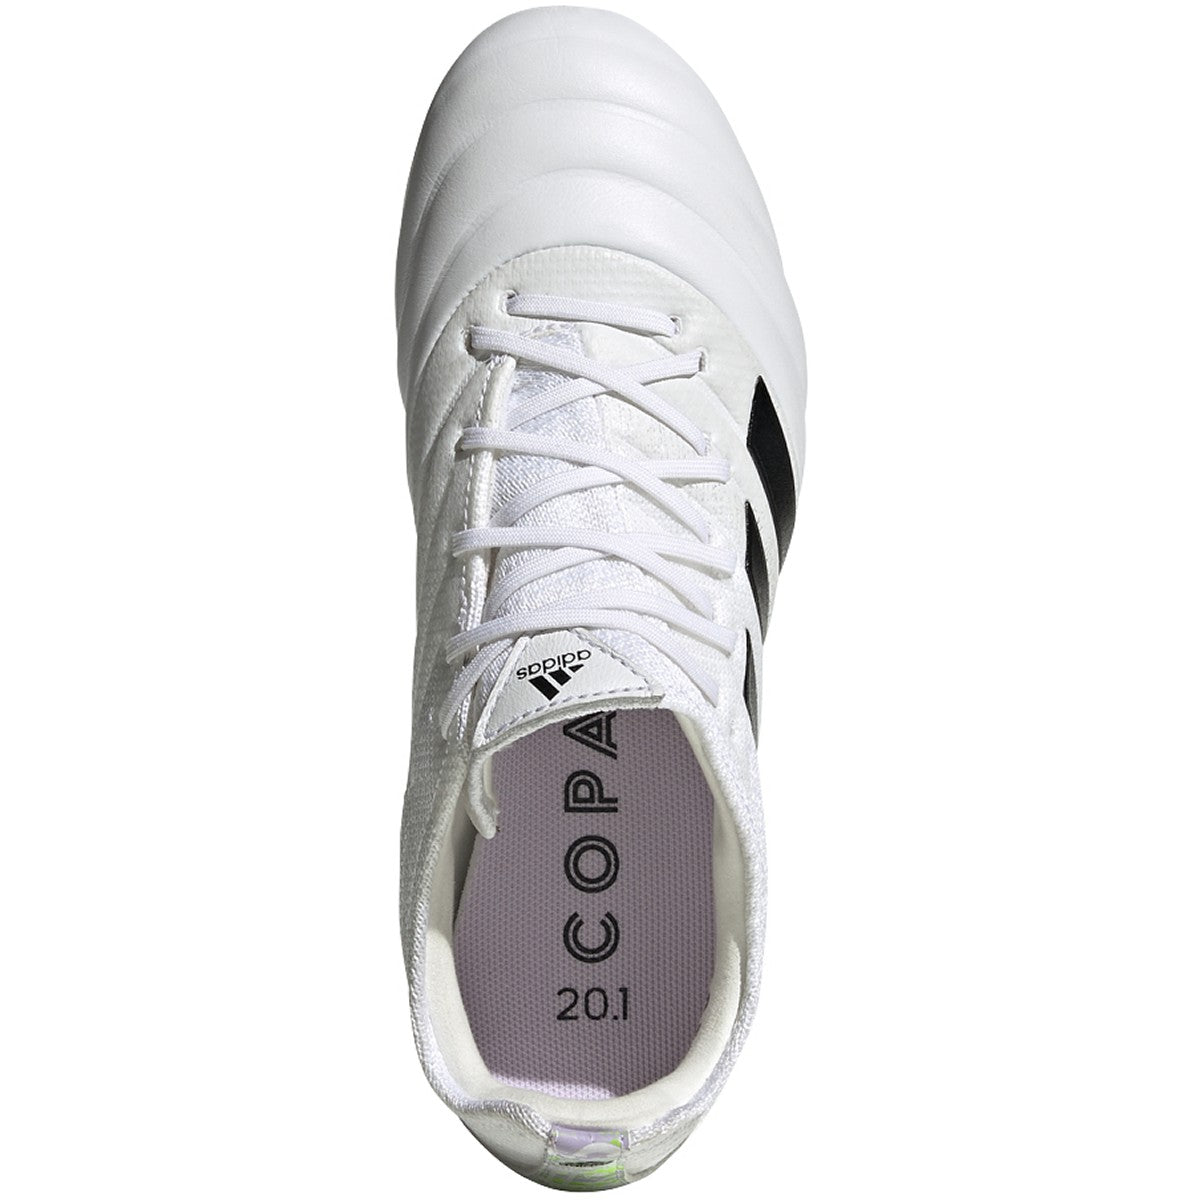 adidas copa black and white